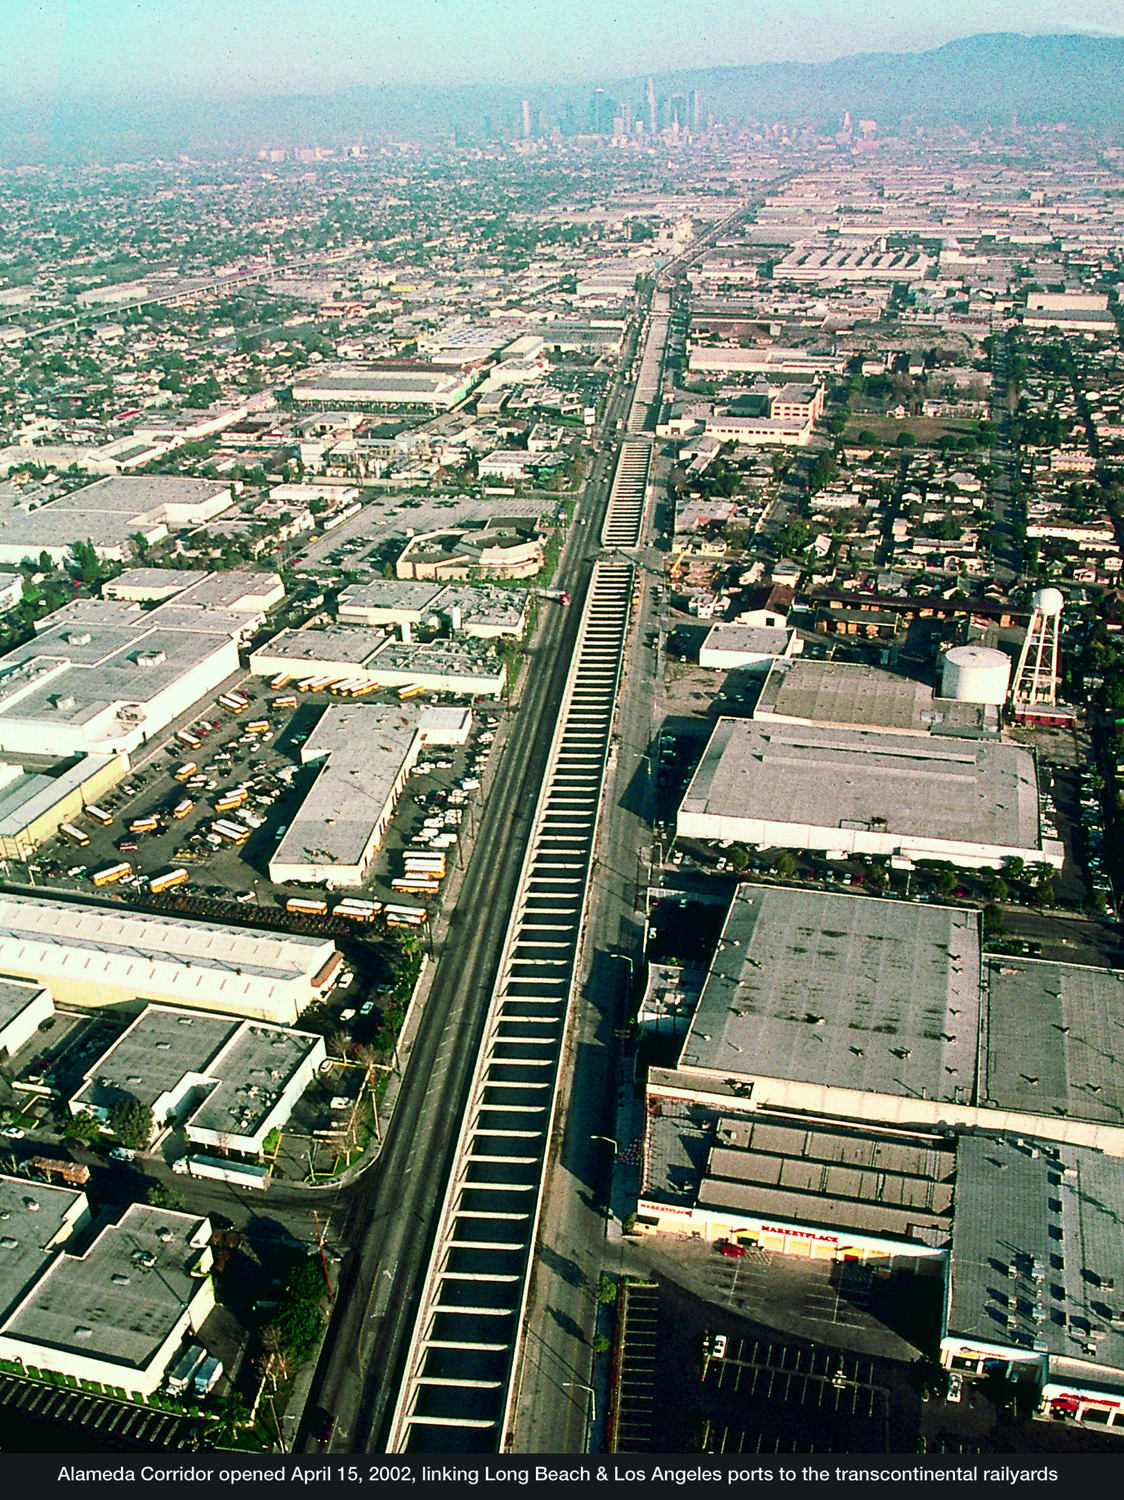 The Alameda Corridor opens in 2002, allowing freight trains to travel from the ports to transcontinental rail yards near downtown Los Angeles quickly, without disrupting road traffic.